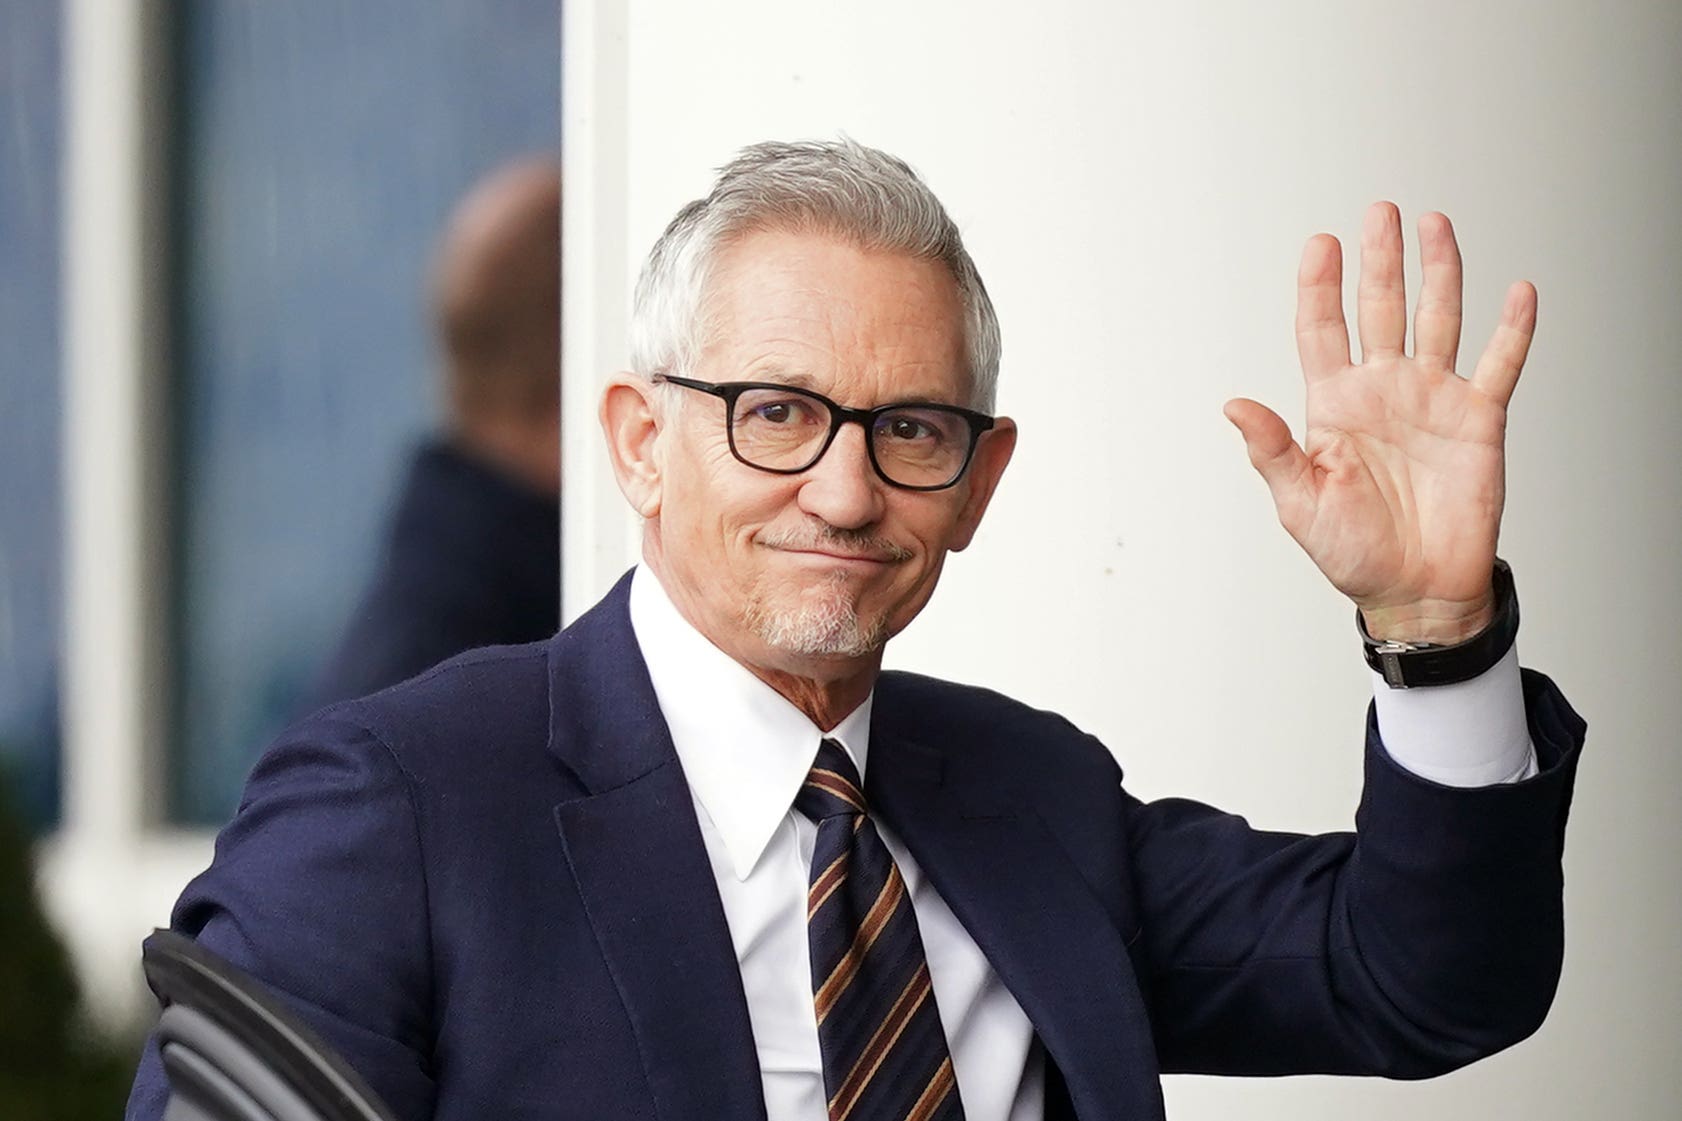 Gary Lineker was taken off air for a tweet comparing the language used to launch a new government asylum seeker policy to that of 1930s Germany